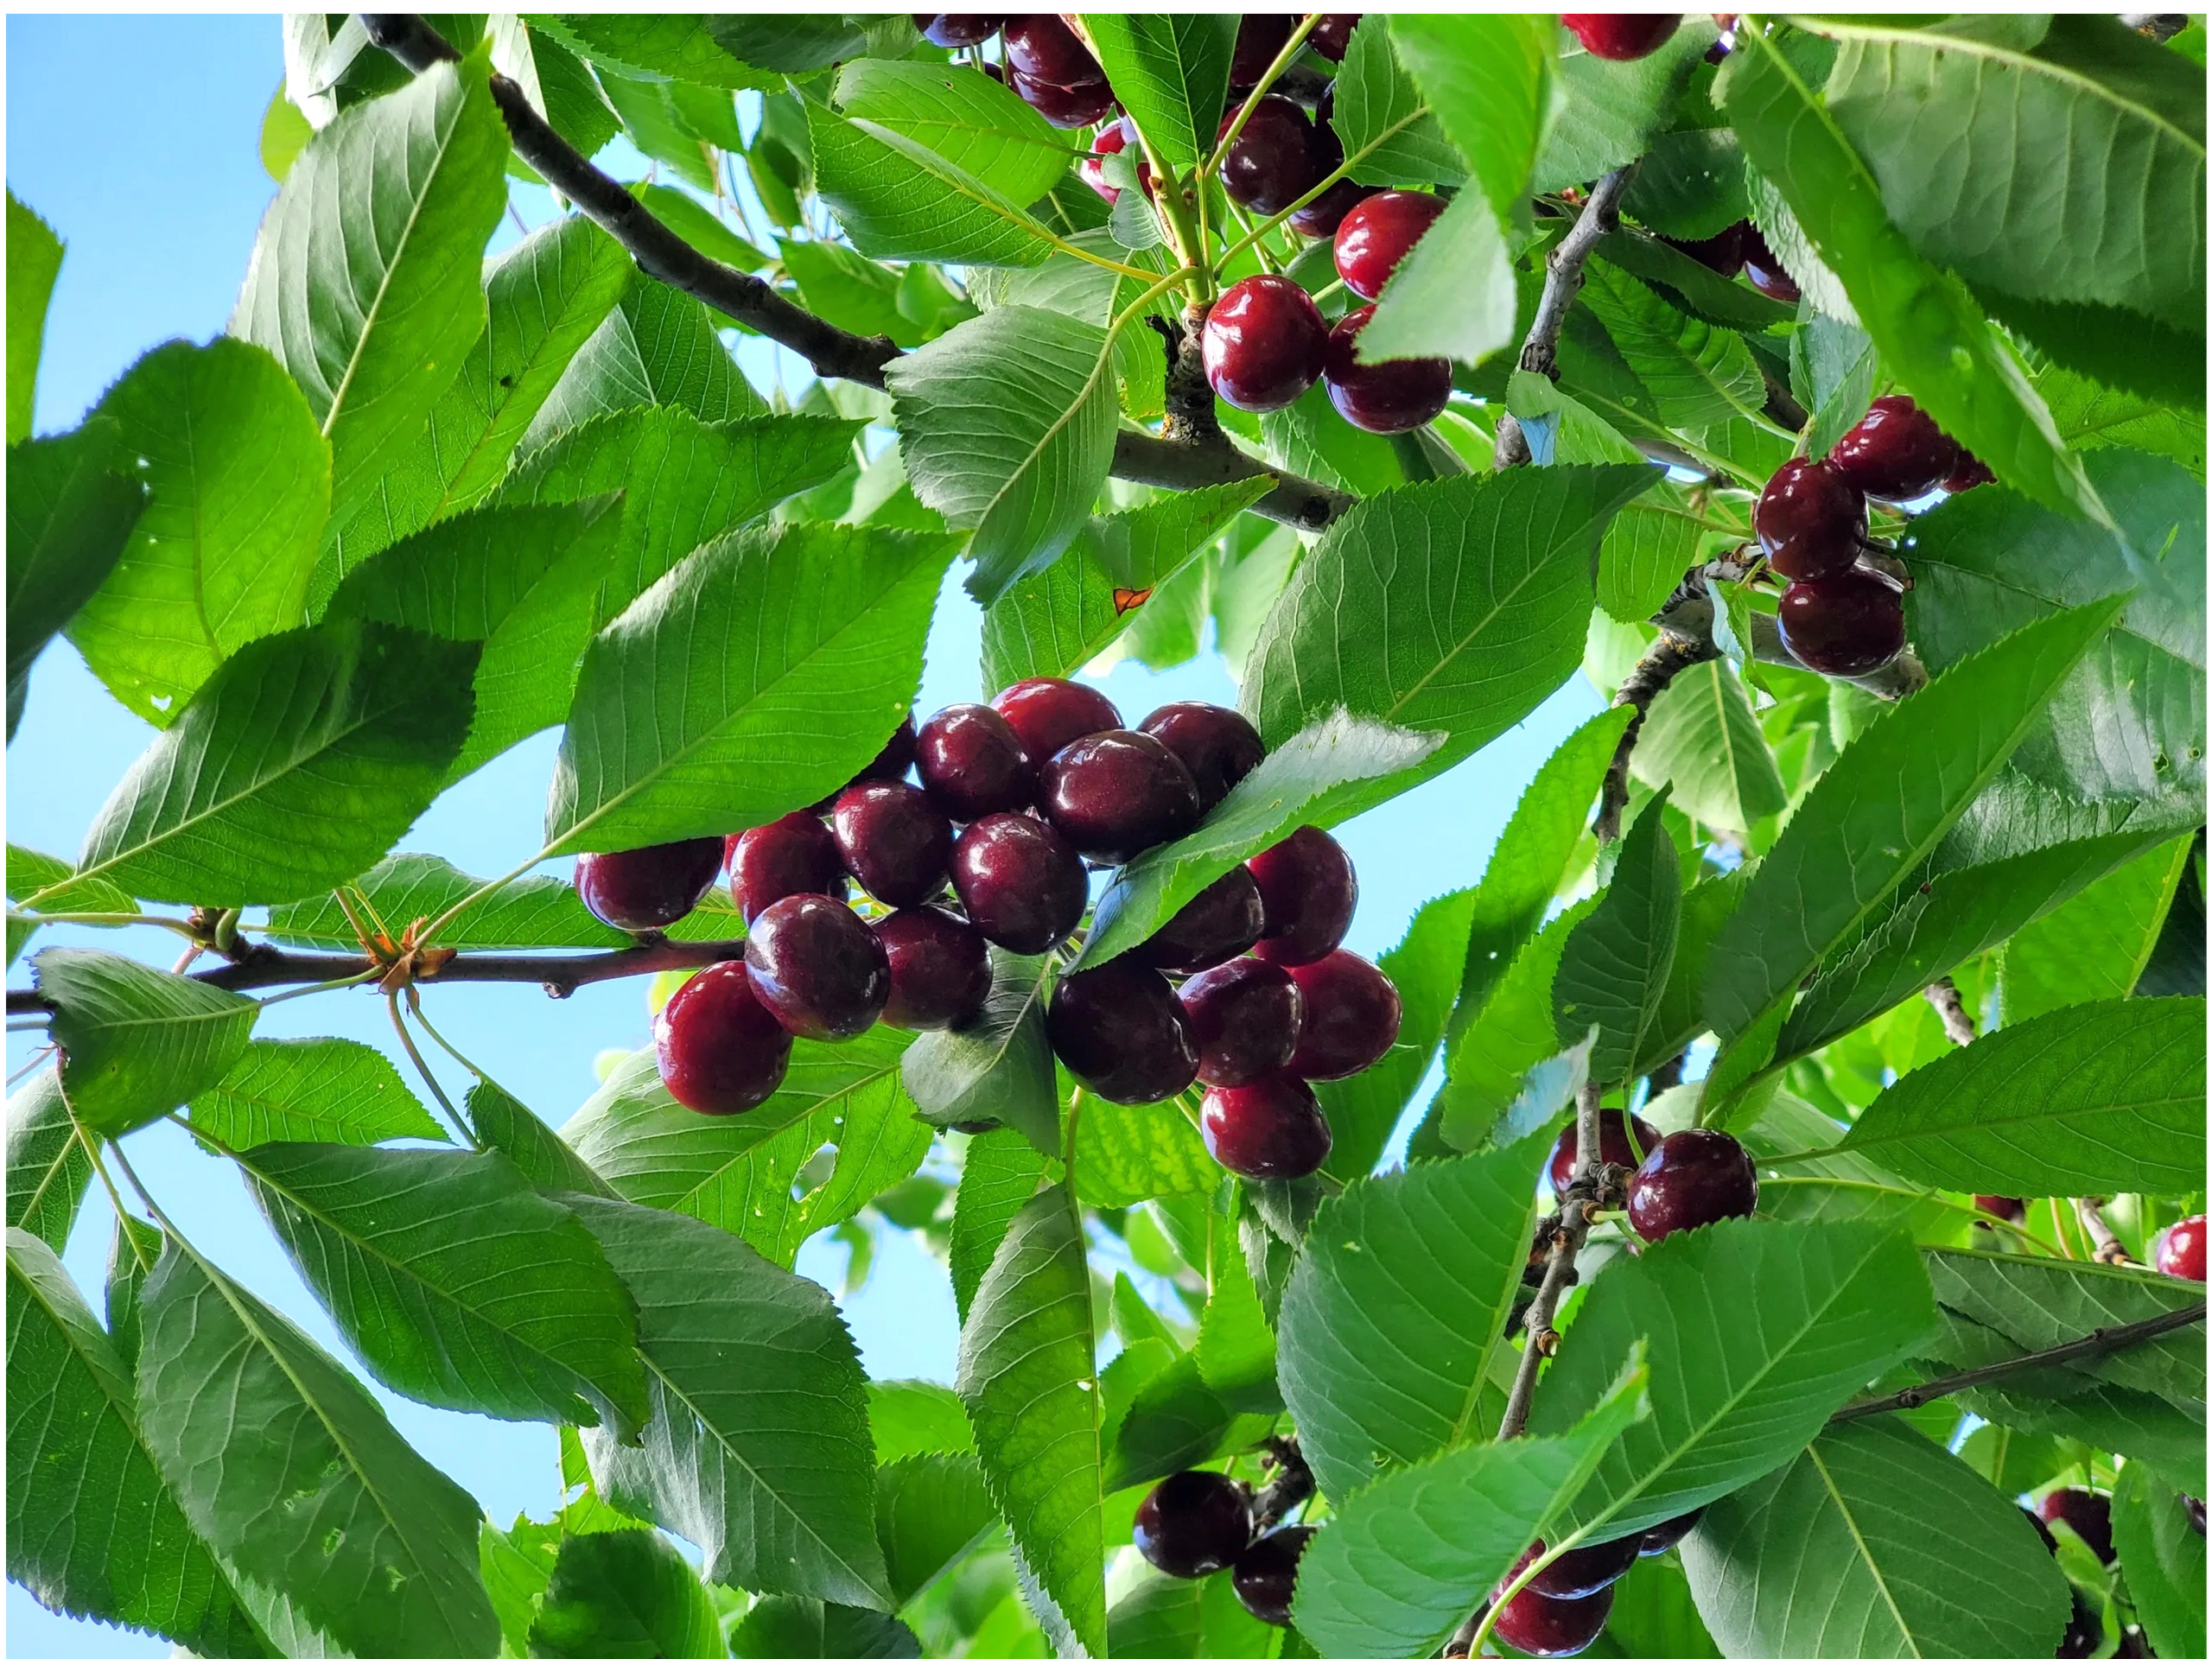 Dark, sweet, juicy, and delicious Bing cherries hanging from a tree. 